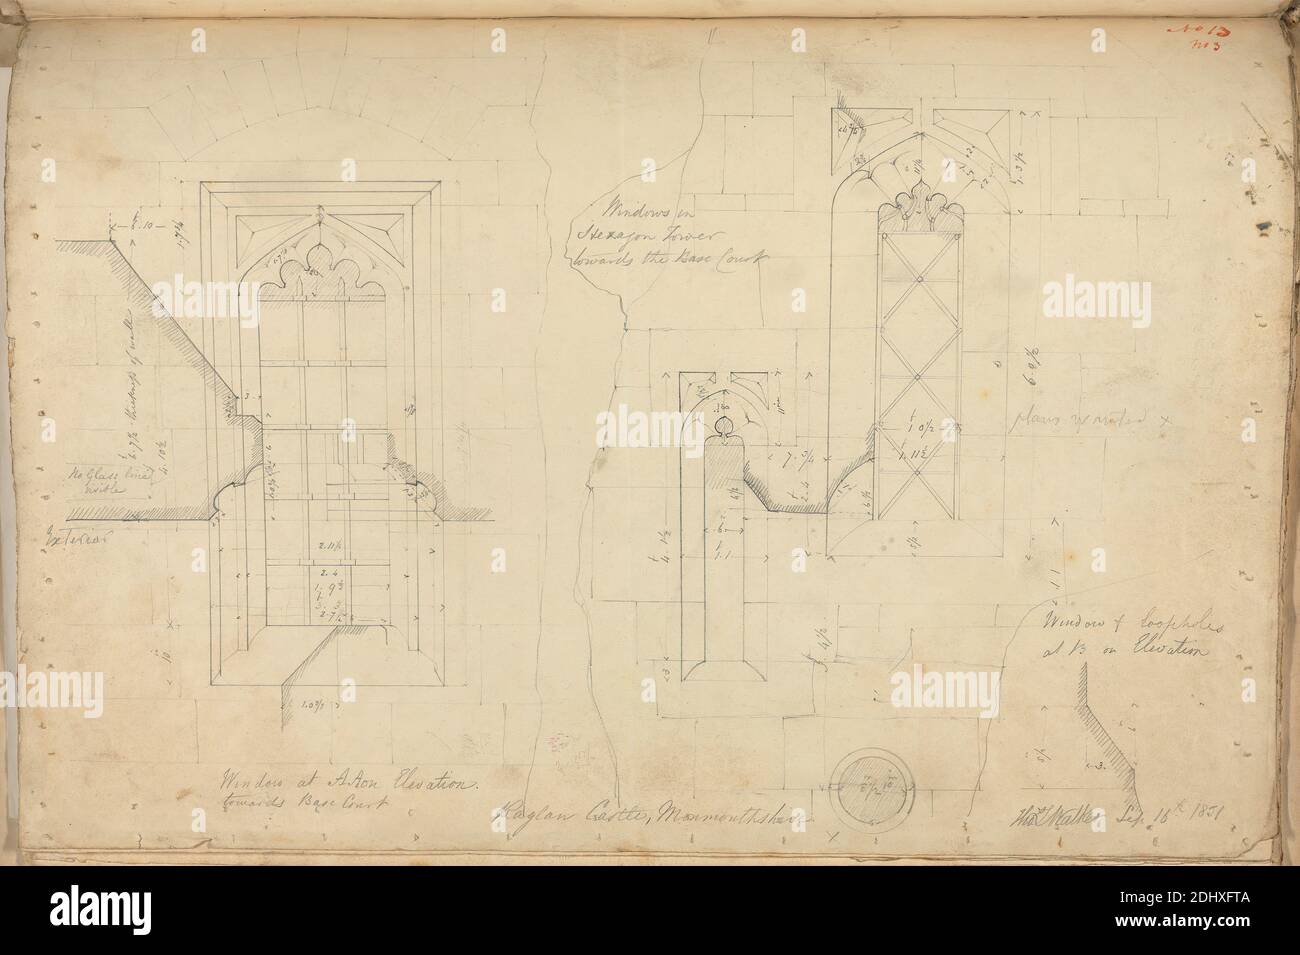 Raglan Castle, Monmouthshire, Wales: Elevations of Windows, unknown artist, (TL Walker), Studio of Augustus Charles Pugin, 1762–1832, French, formerly Augustus Welby Northmore Pugin, 1812–1852, British, 1831, Graphite on medium, slightly textured, cream wove paper, Sheet: 10 5/8 x 15 inches (27 x 38.1 cm), architectural subject, castle, courtyards, elevations (drawings), exterior, Gothic (Medieval), hexagon, loopholes, plans (drawings), sections, tower (building division), windows, Monmouthshire, Raglan Castle Stock Photo